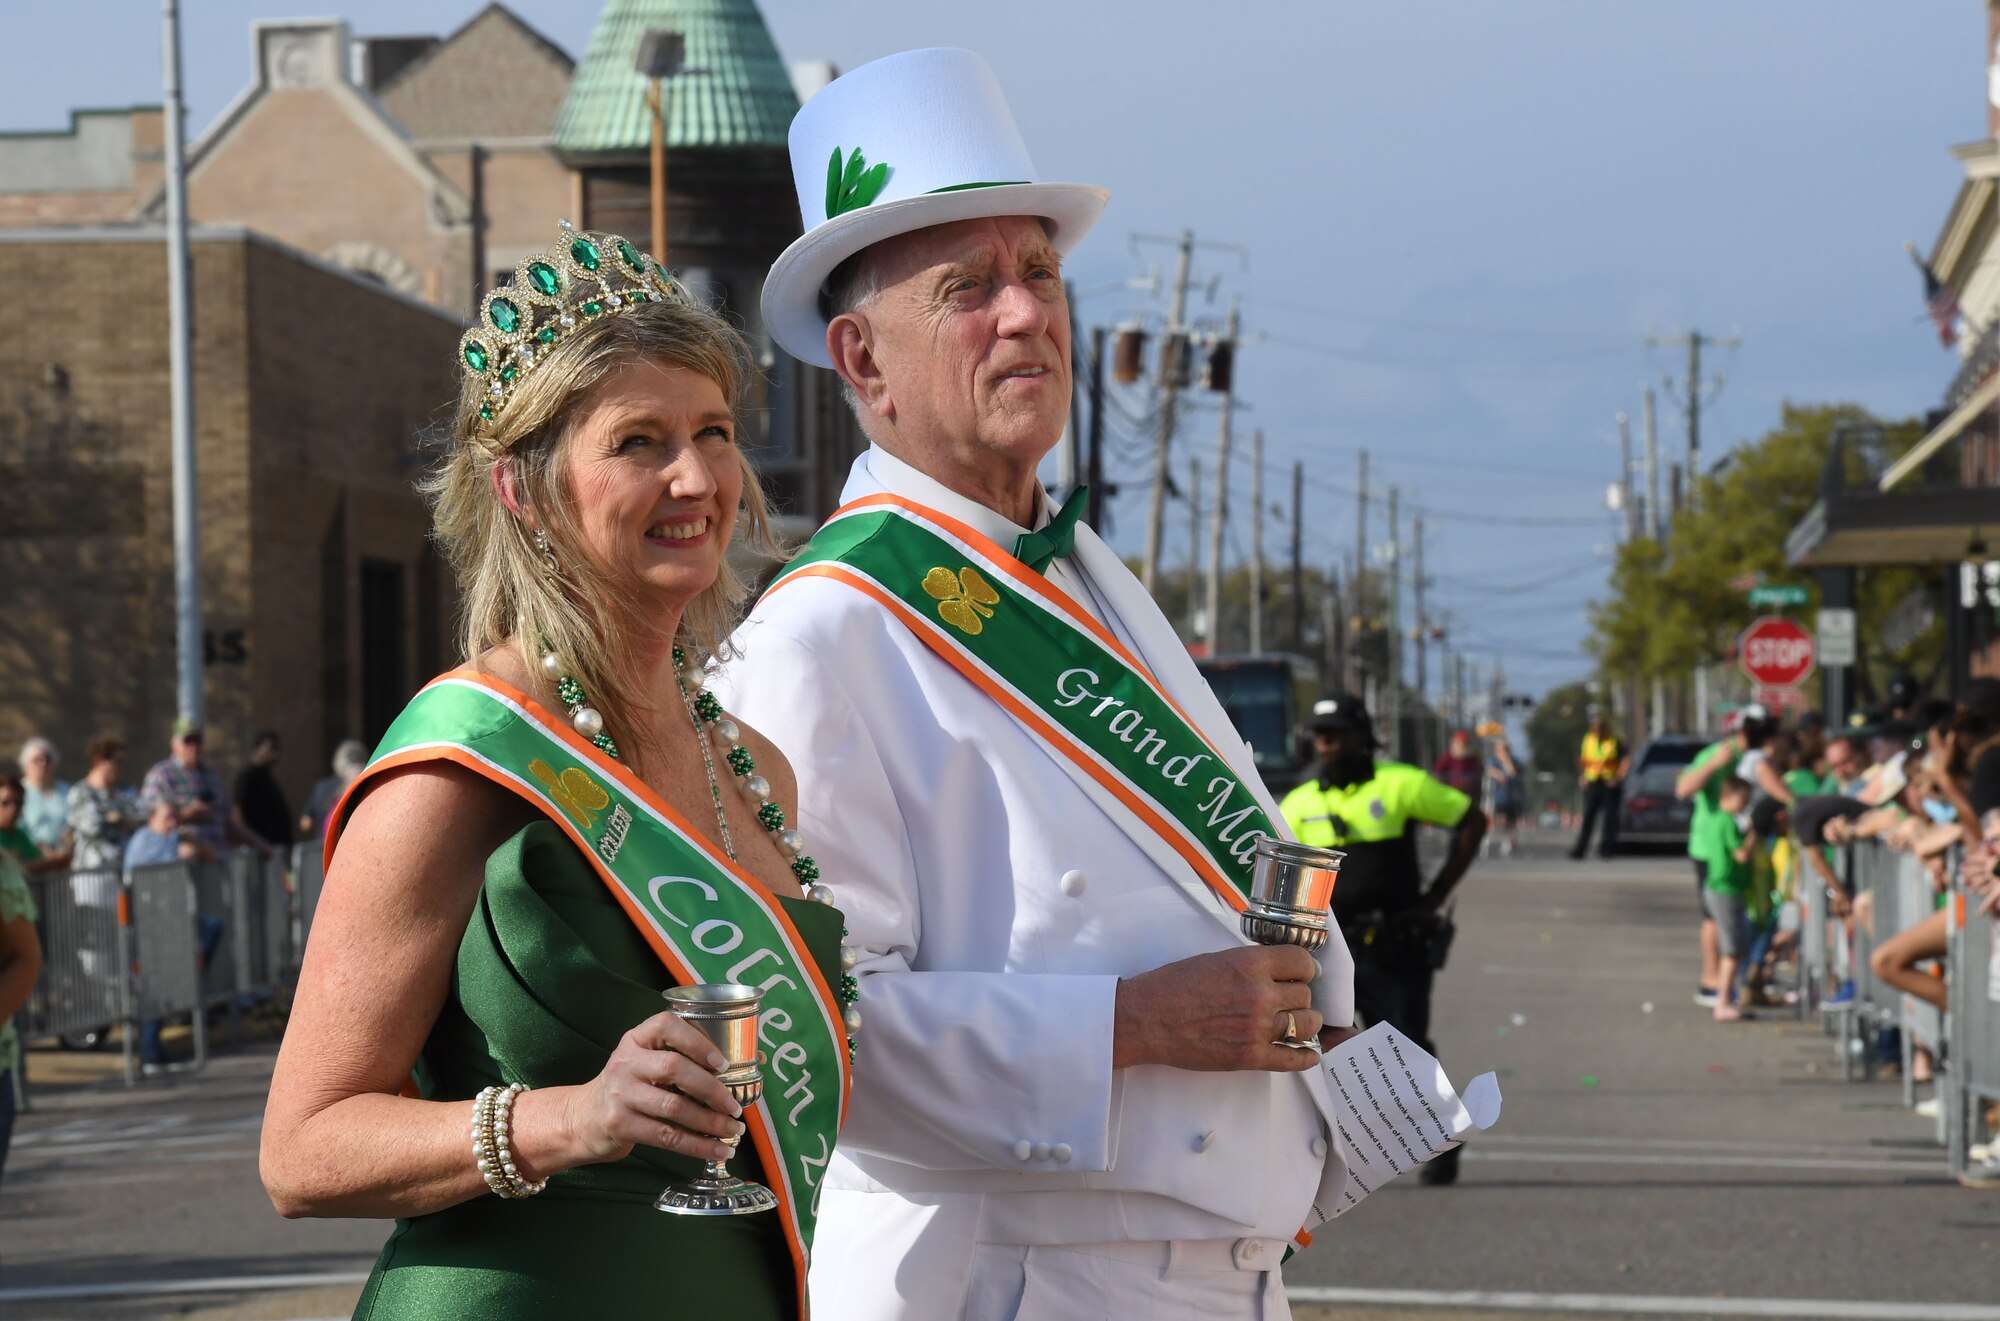 Stacy Thunelius, 2023 Colleen, and Charles Nannery, 2023 Grand Marshal, prepare to make a toast during the Hibernia Marching Society of Mississippi St. Patrick's Day Parade in Biloxi, Mississippi, March 11, 2023.